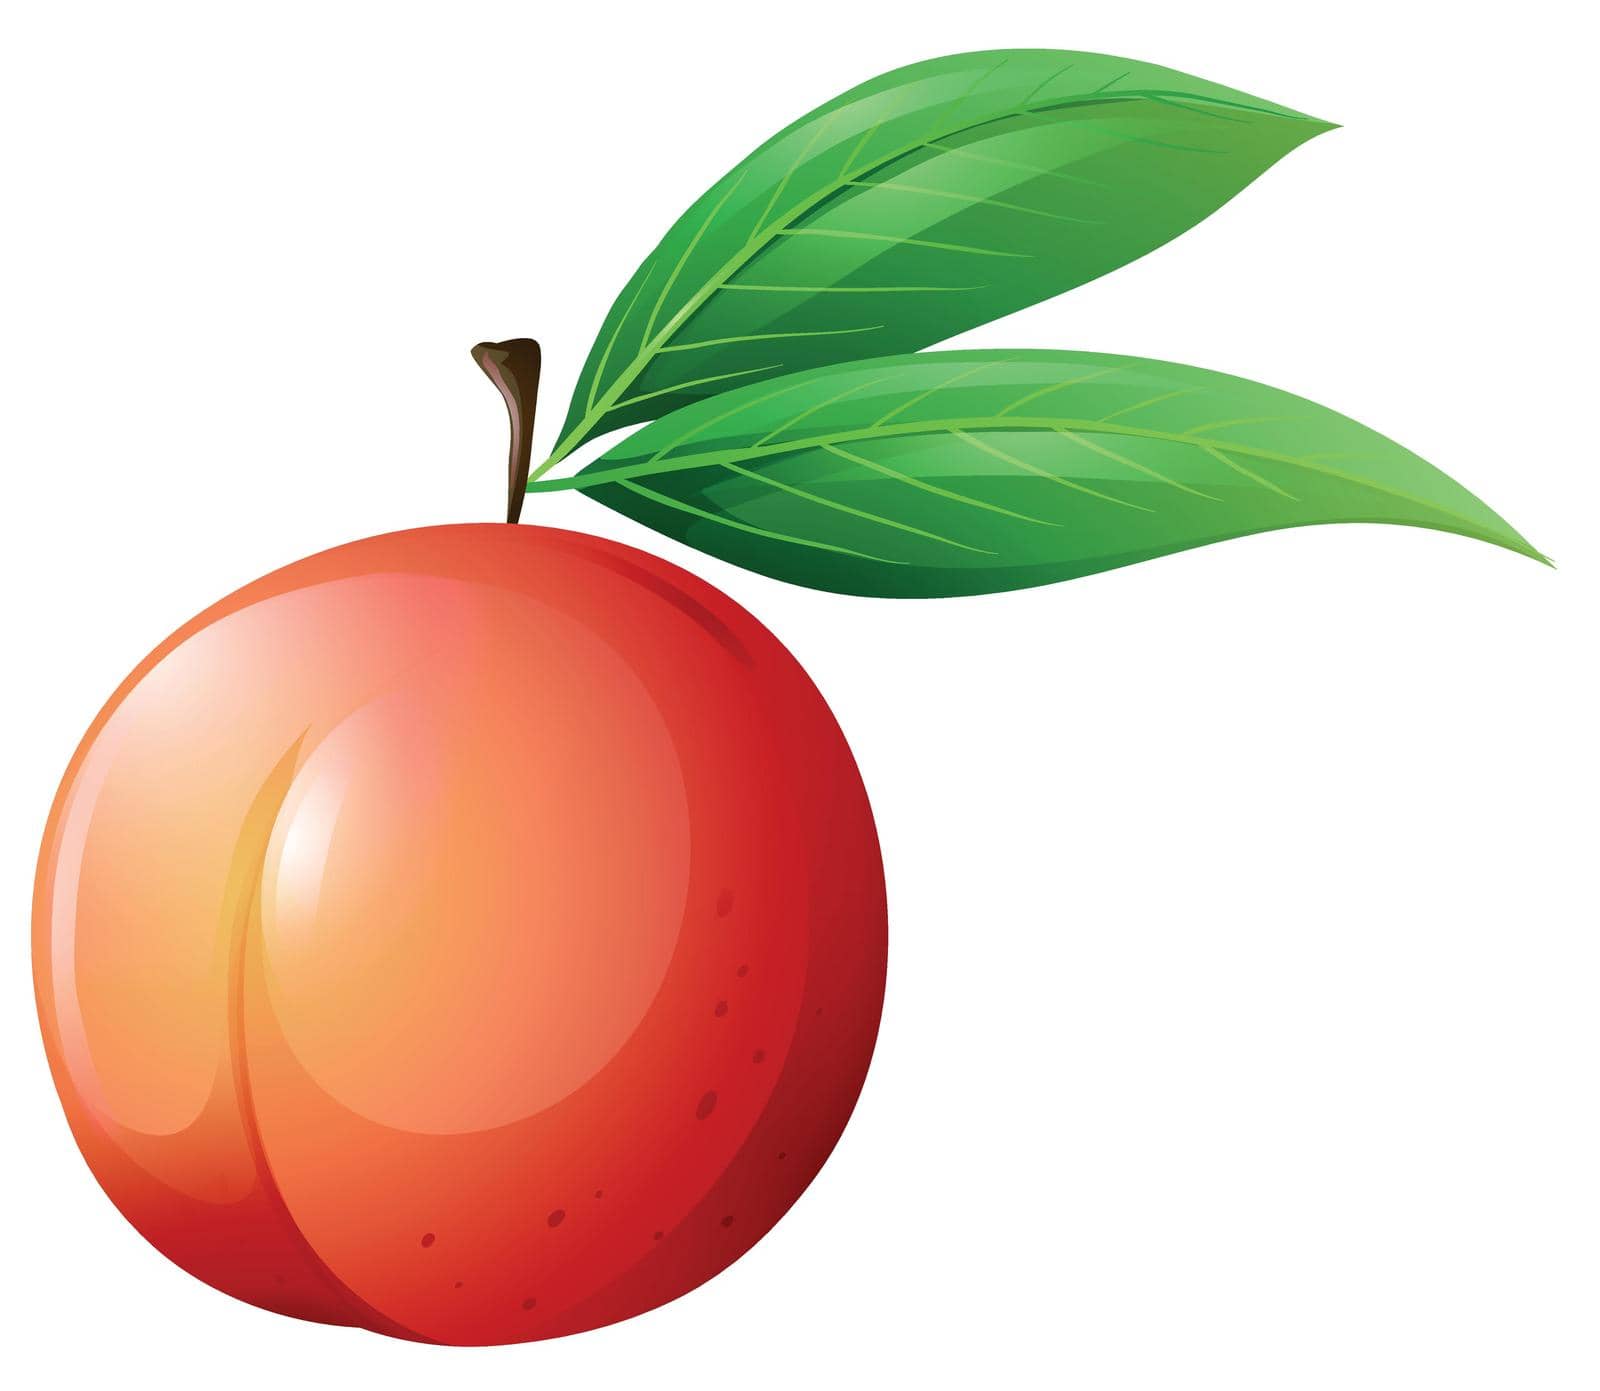 Fresh peach with leaves illustration